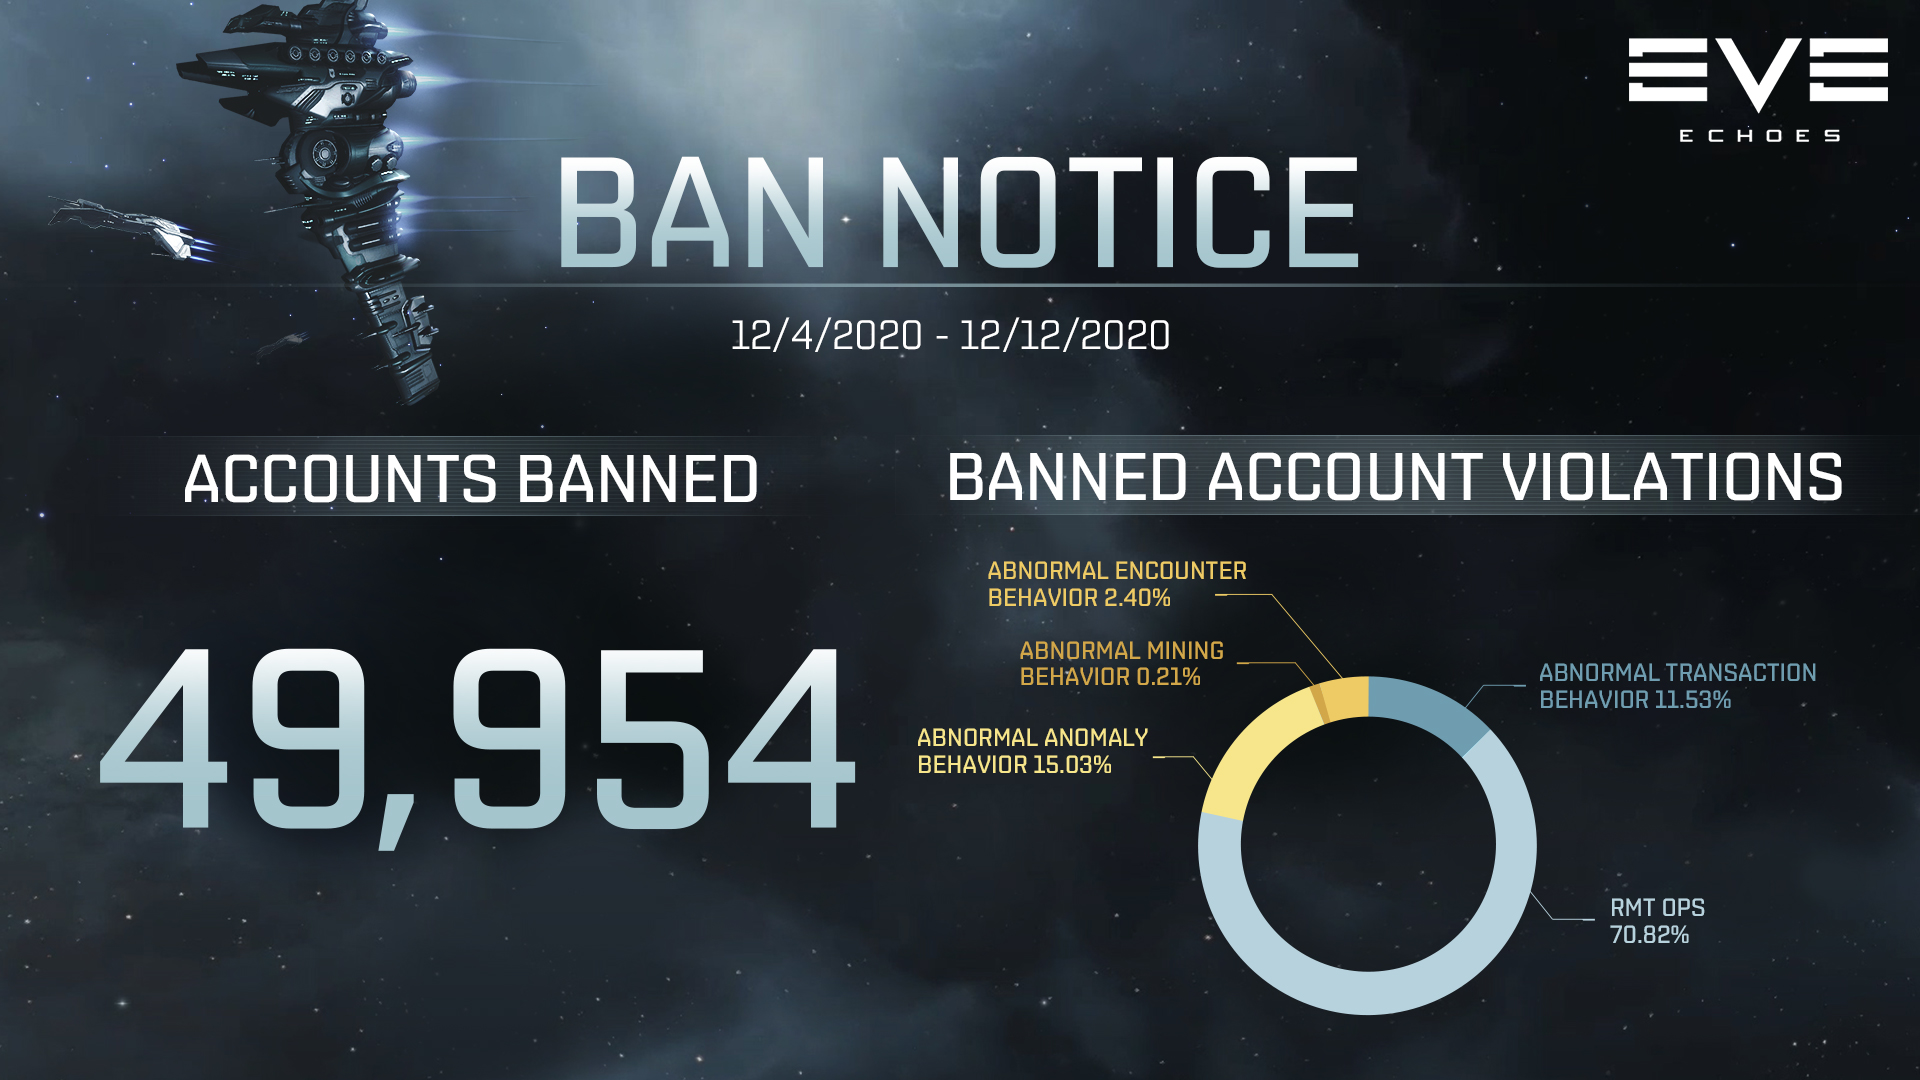 Ban Notice for 12/4-12/12